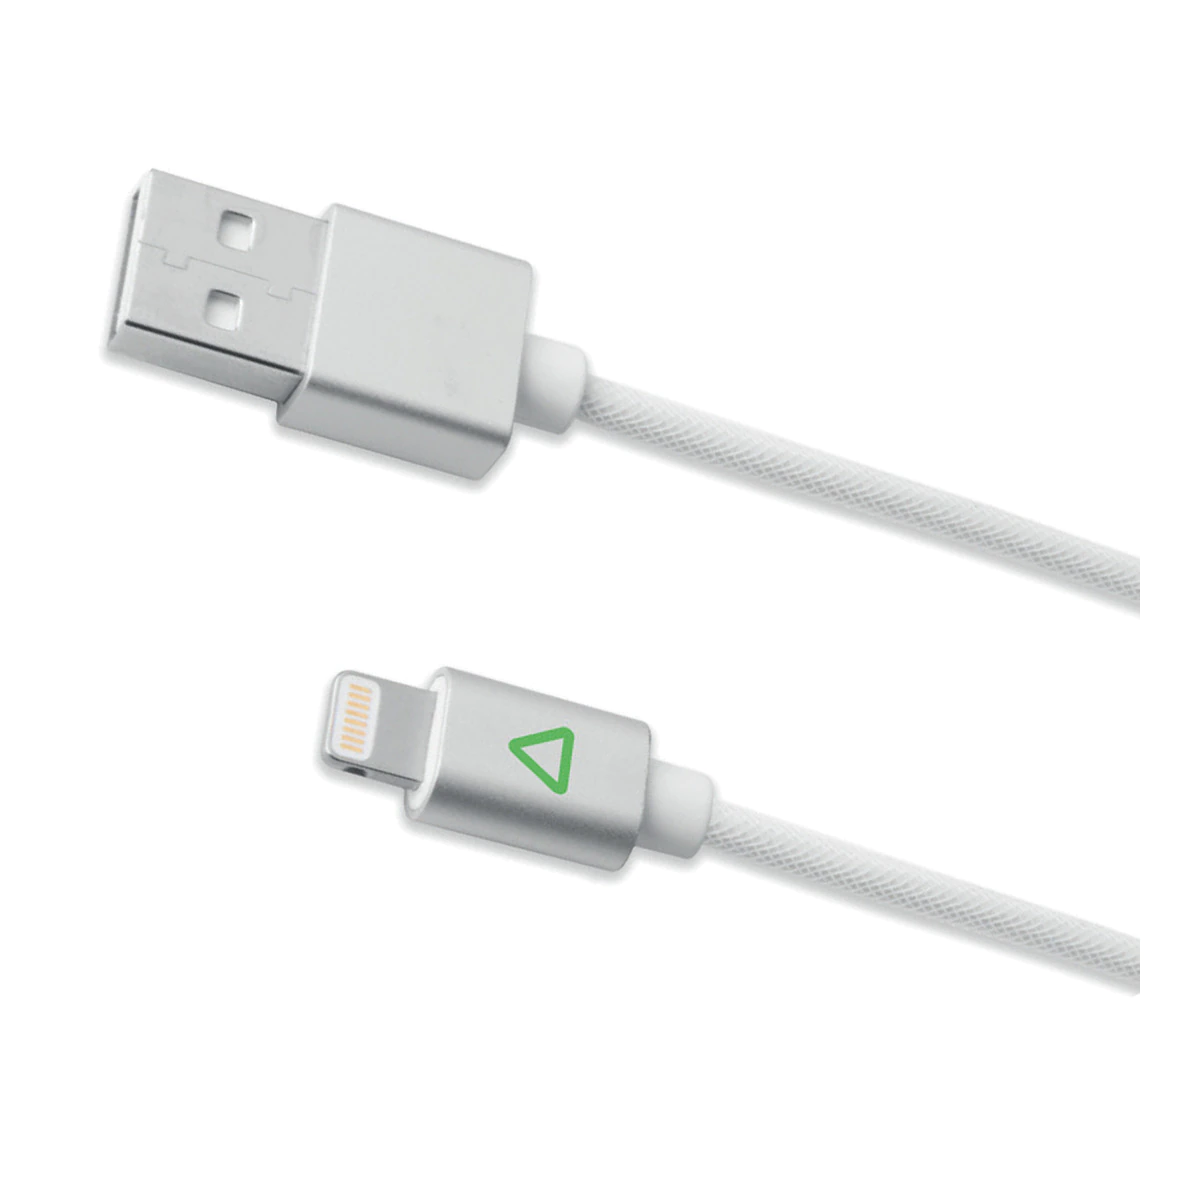 Cable Inves USB a Lightning de 1 metro blanco